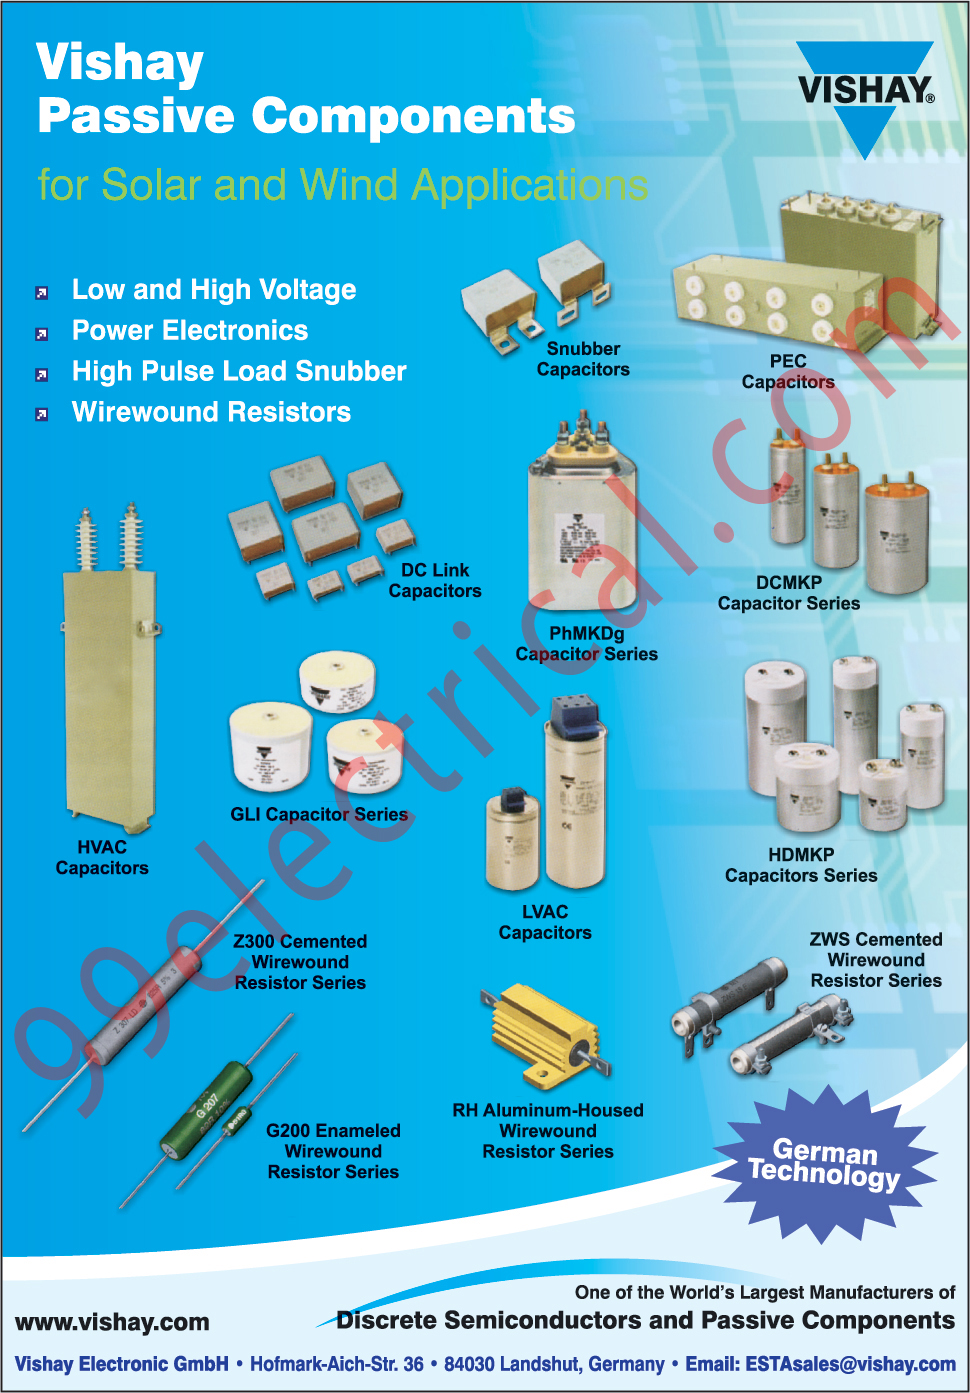 Electrical Parts, Capacitors, Discrete Semiconductors, Passive Components, Semiconductors, Wirewound Resistor, Resistor, Power Electronics, Snubber Capacitor, DC Link Capacitor, PEC Capacitors, HVAC Capacitors, GLI Capacitor, LVAC Capacitors,Semi Conductors